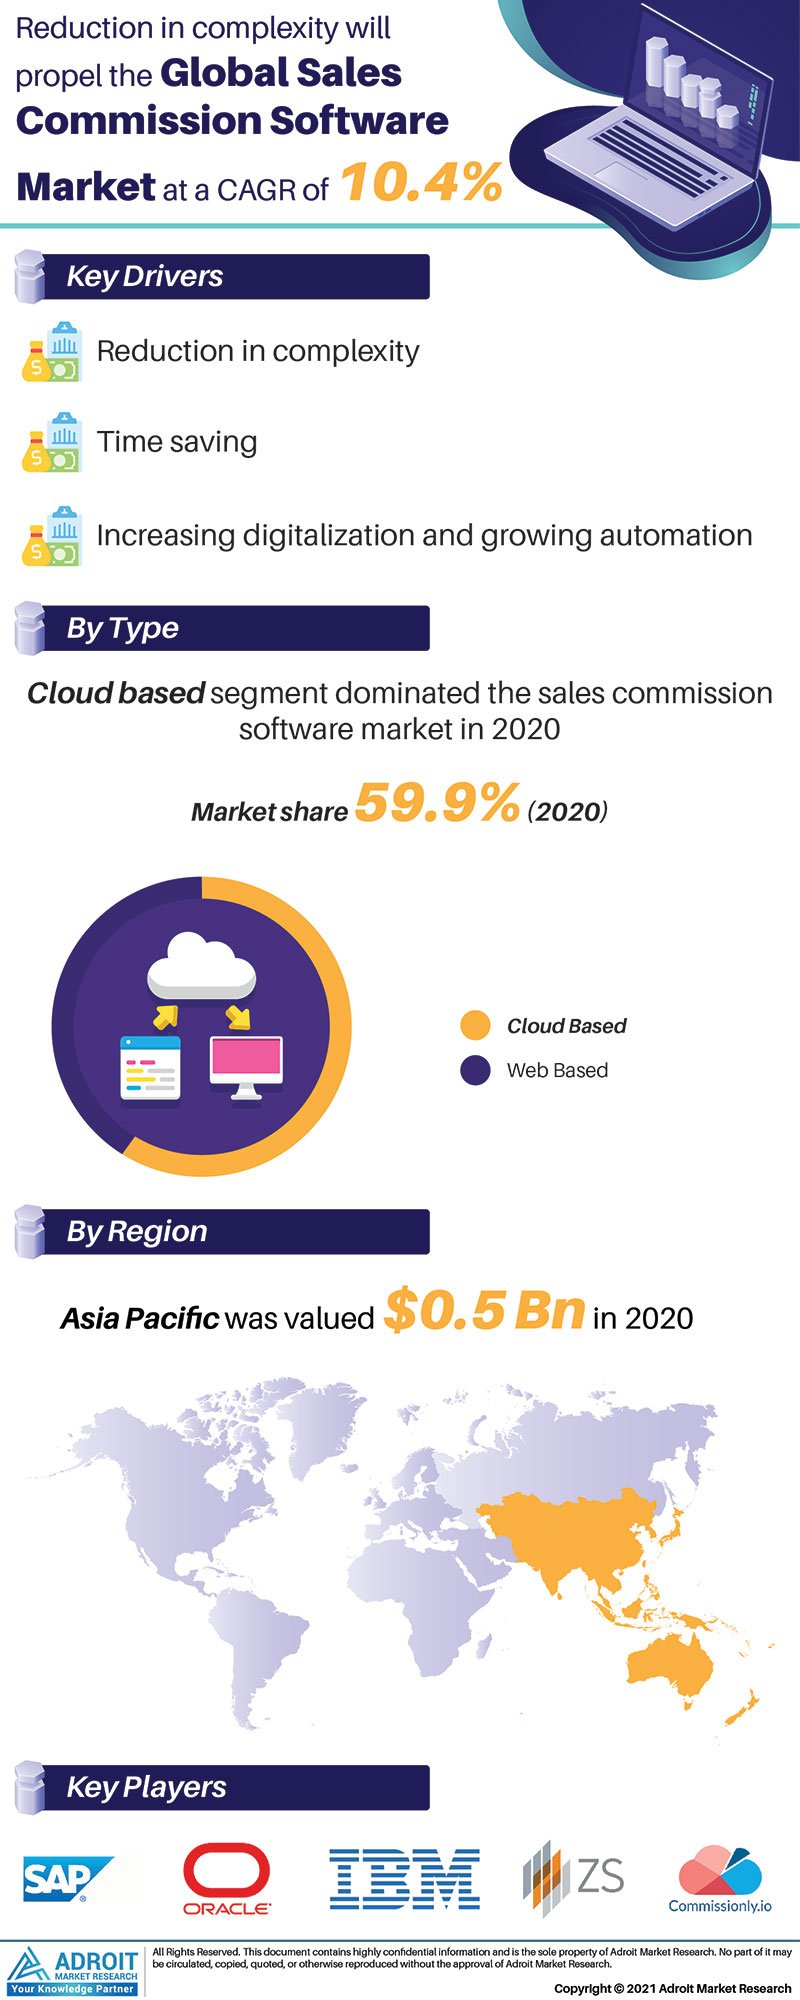 Global Sales Commission Software Market Size 2020 By Product, Procedure, Region and Forecast 2021 to 2025